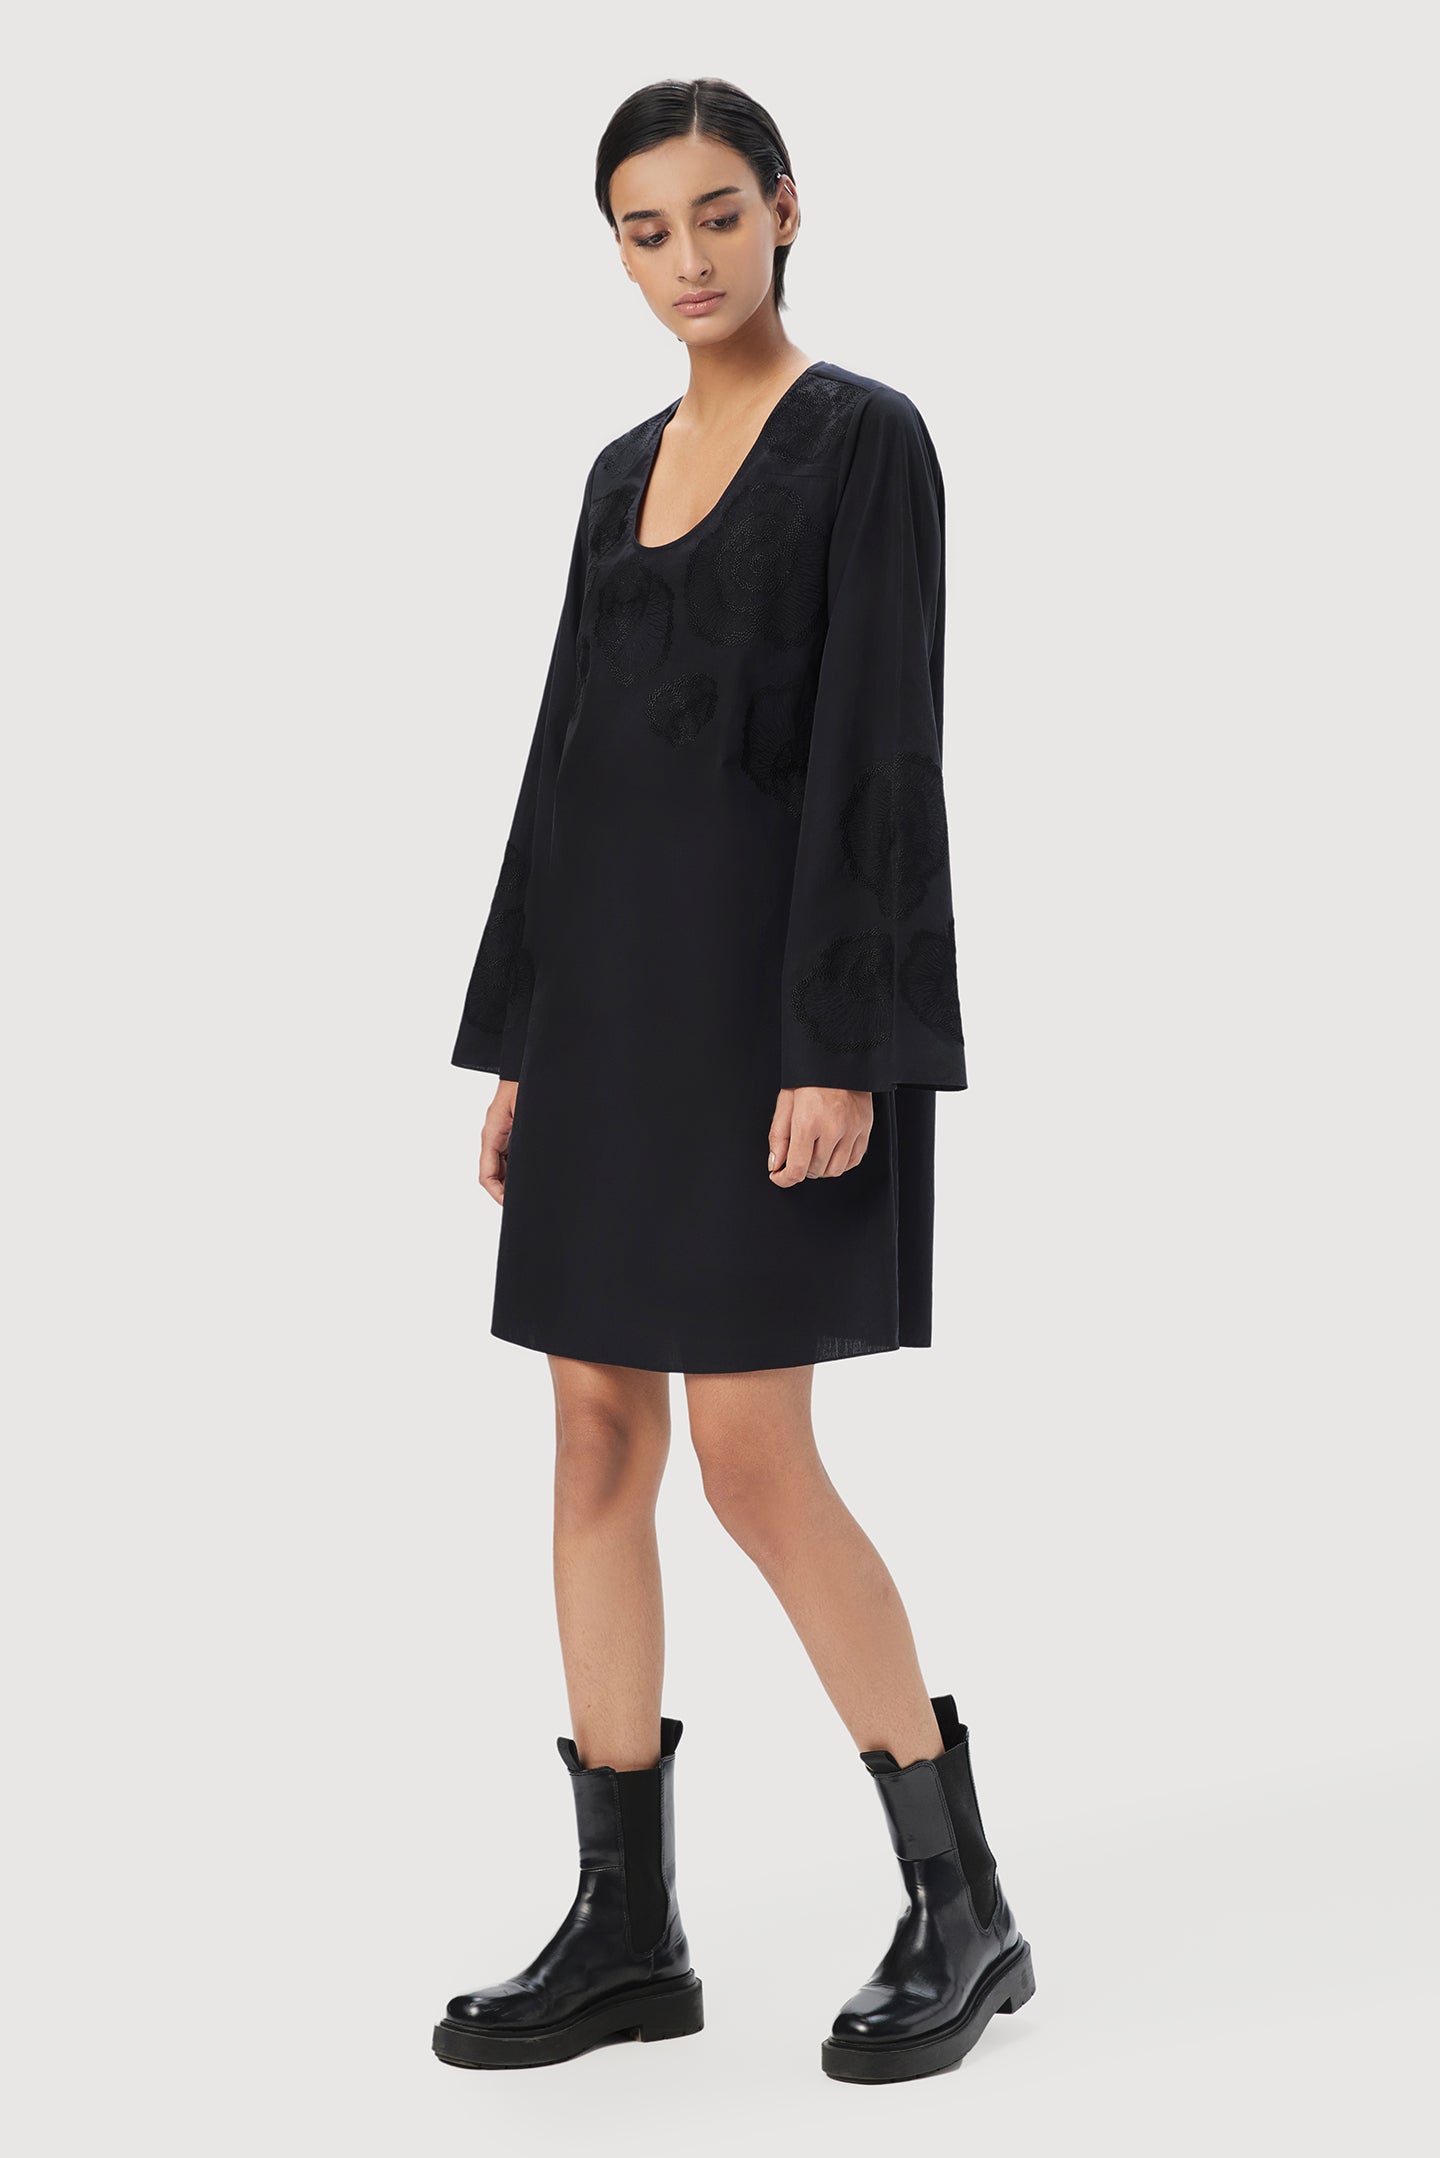 A-Line Deep Oval Neck Dress with Bell Sleeves